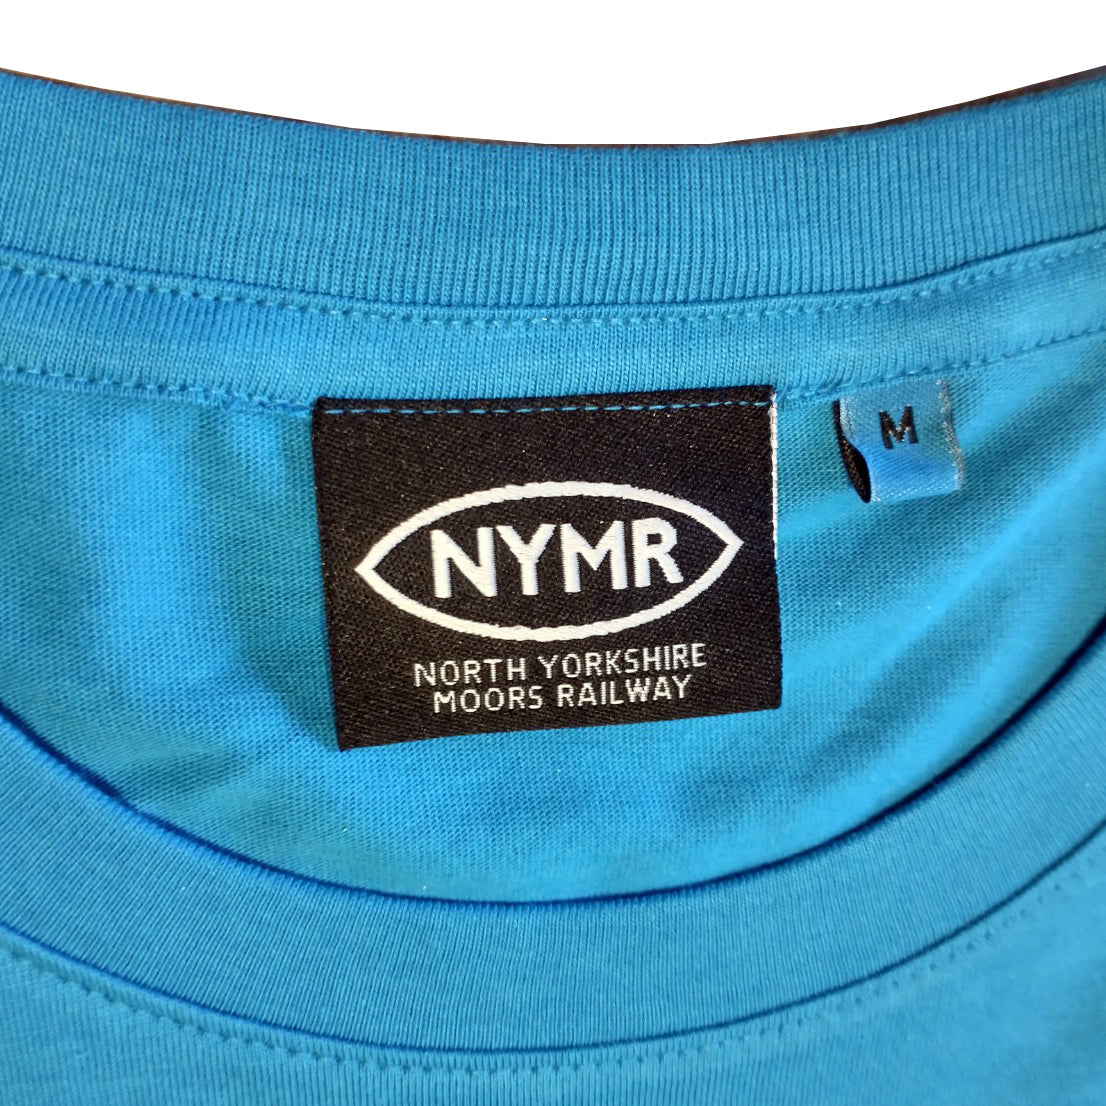 A close up shot of the NYMR logo neck label